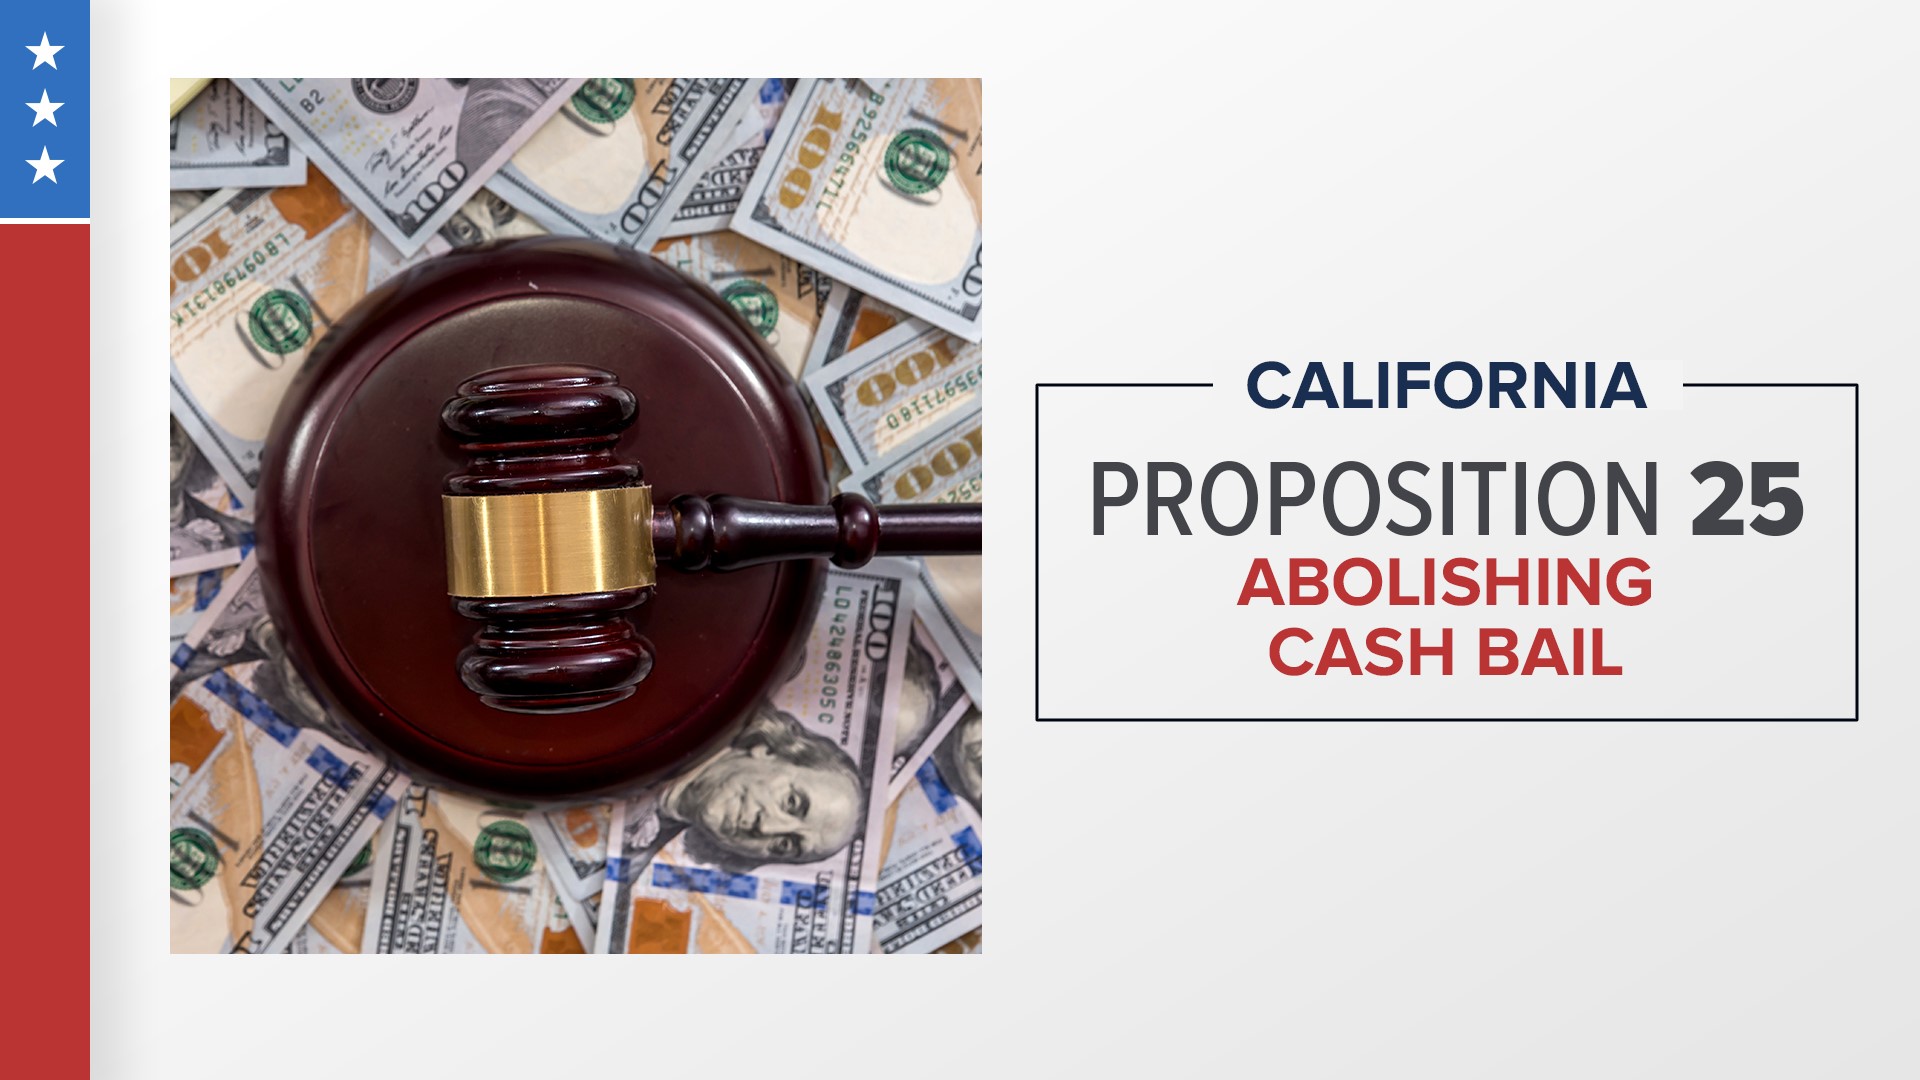 Proposition 25 is a unique ballot item: a referendum on a law passed by the legislature in 2018 to end bail in California.